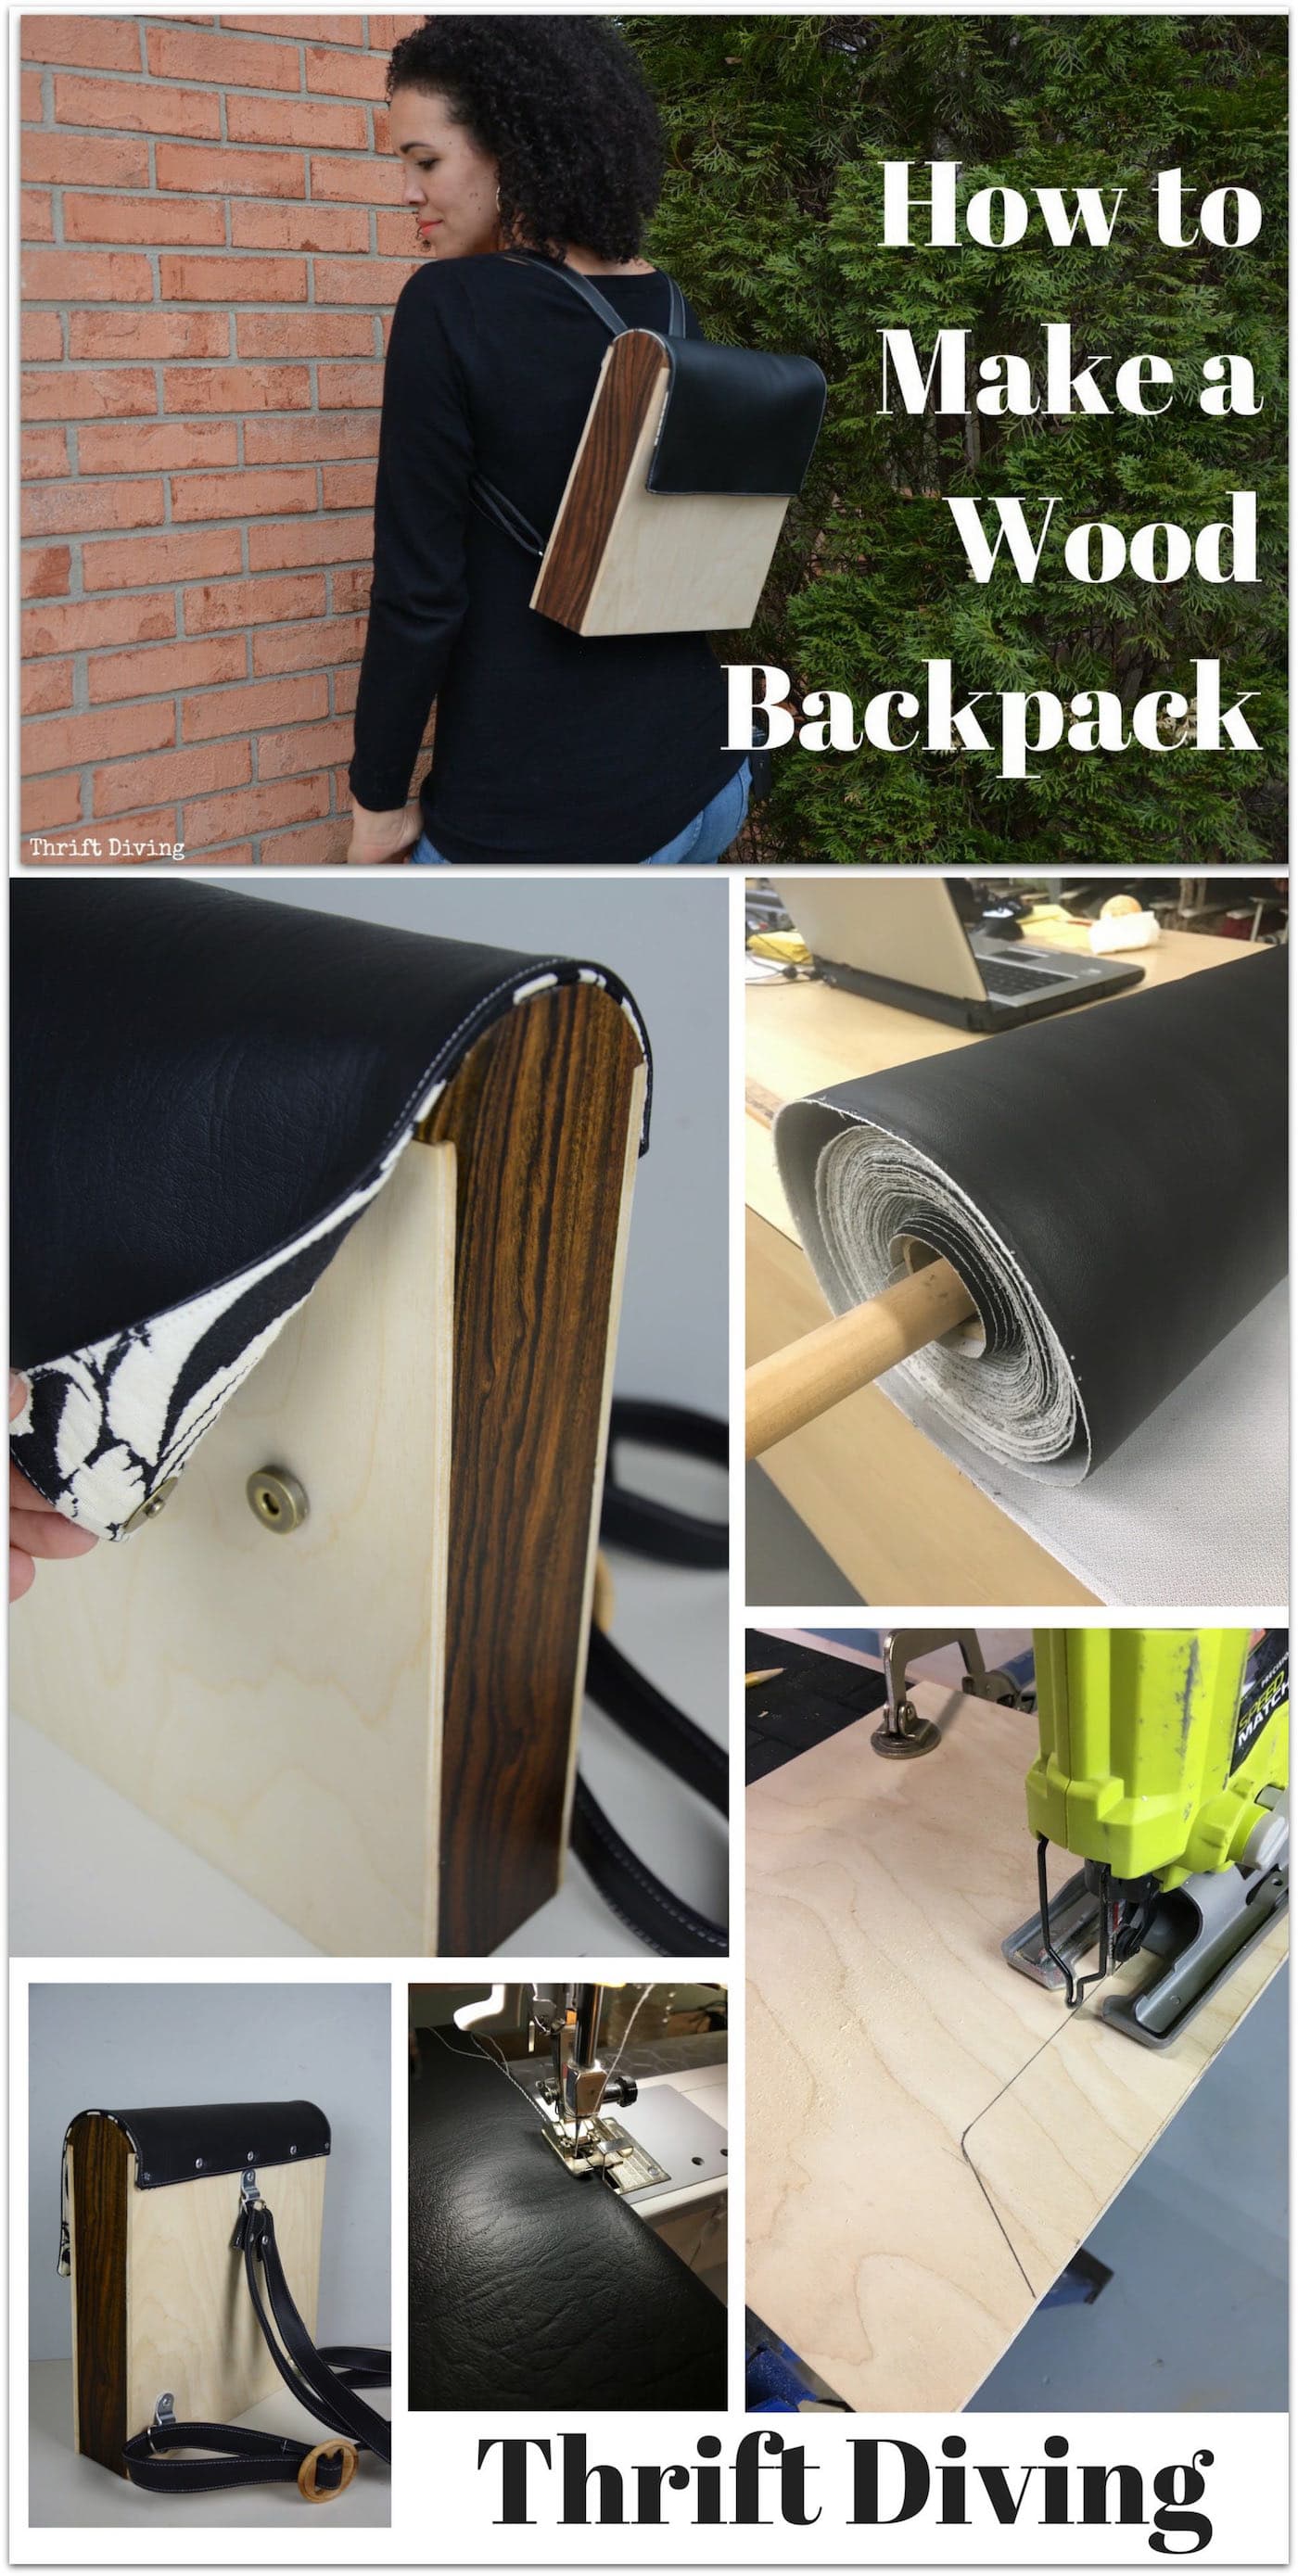 Learn how to make a DIY wood backpack with a few simple tools and materials - Thrift Diving